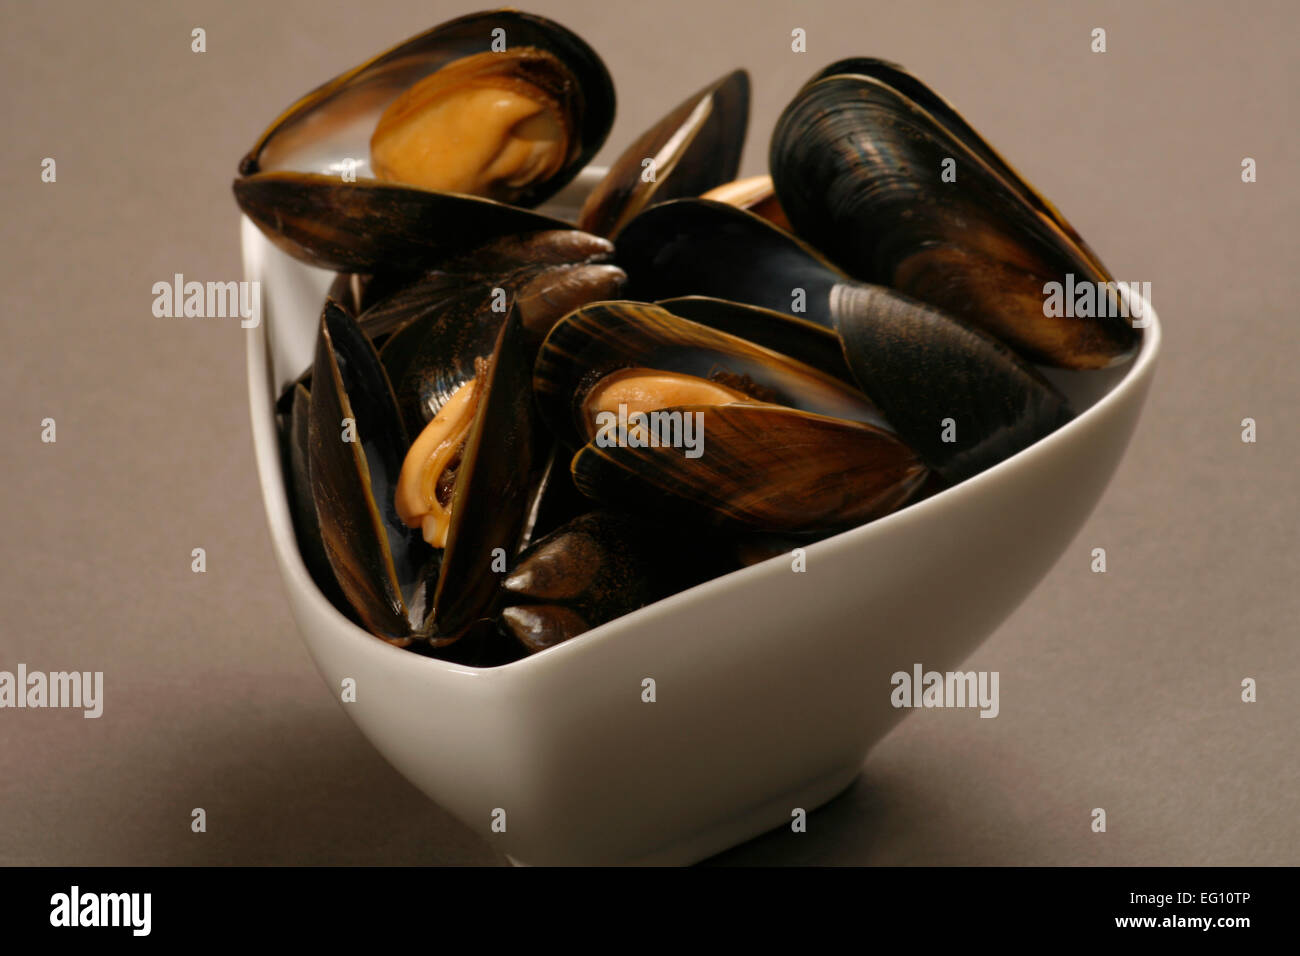 Mussels Stock Photo